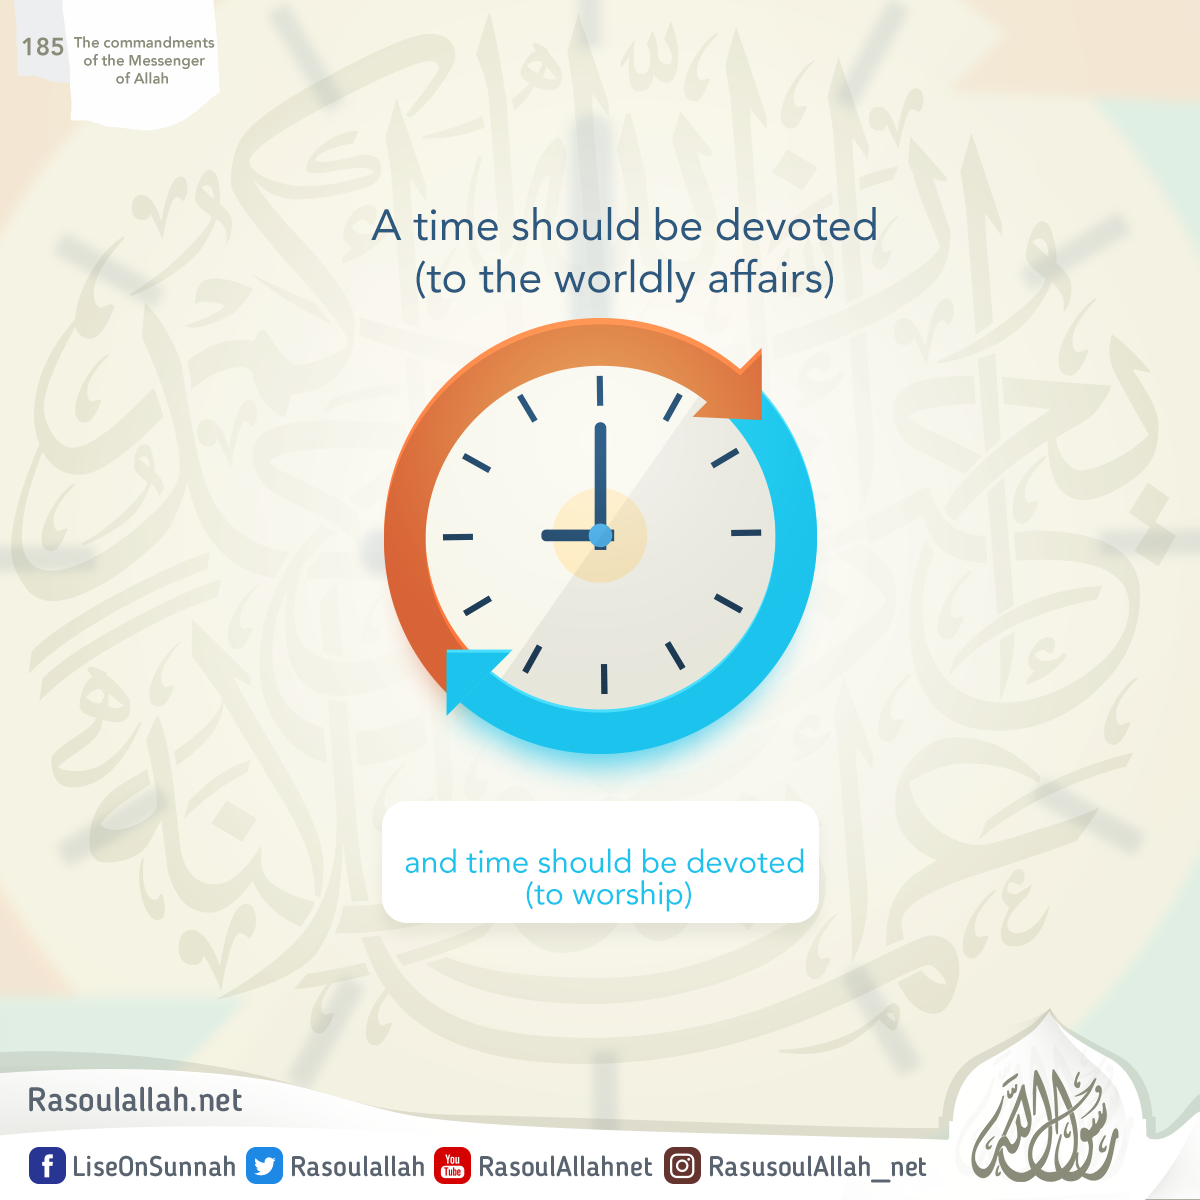 A time should be devoted (to the worldly affairs) and time should be devoted (to worship)